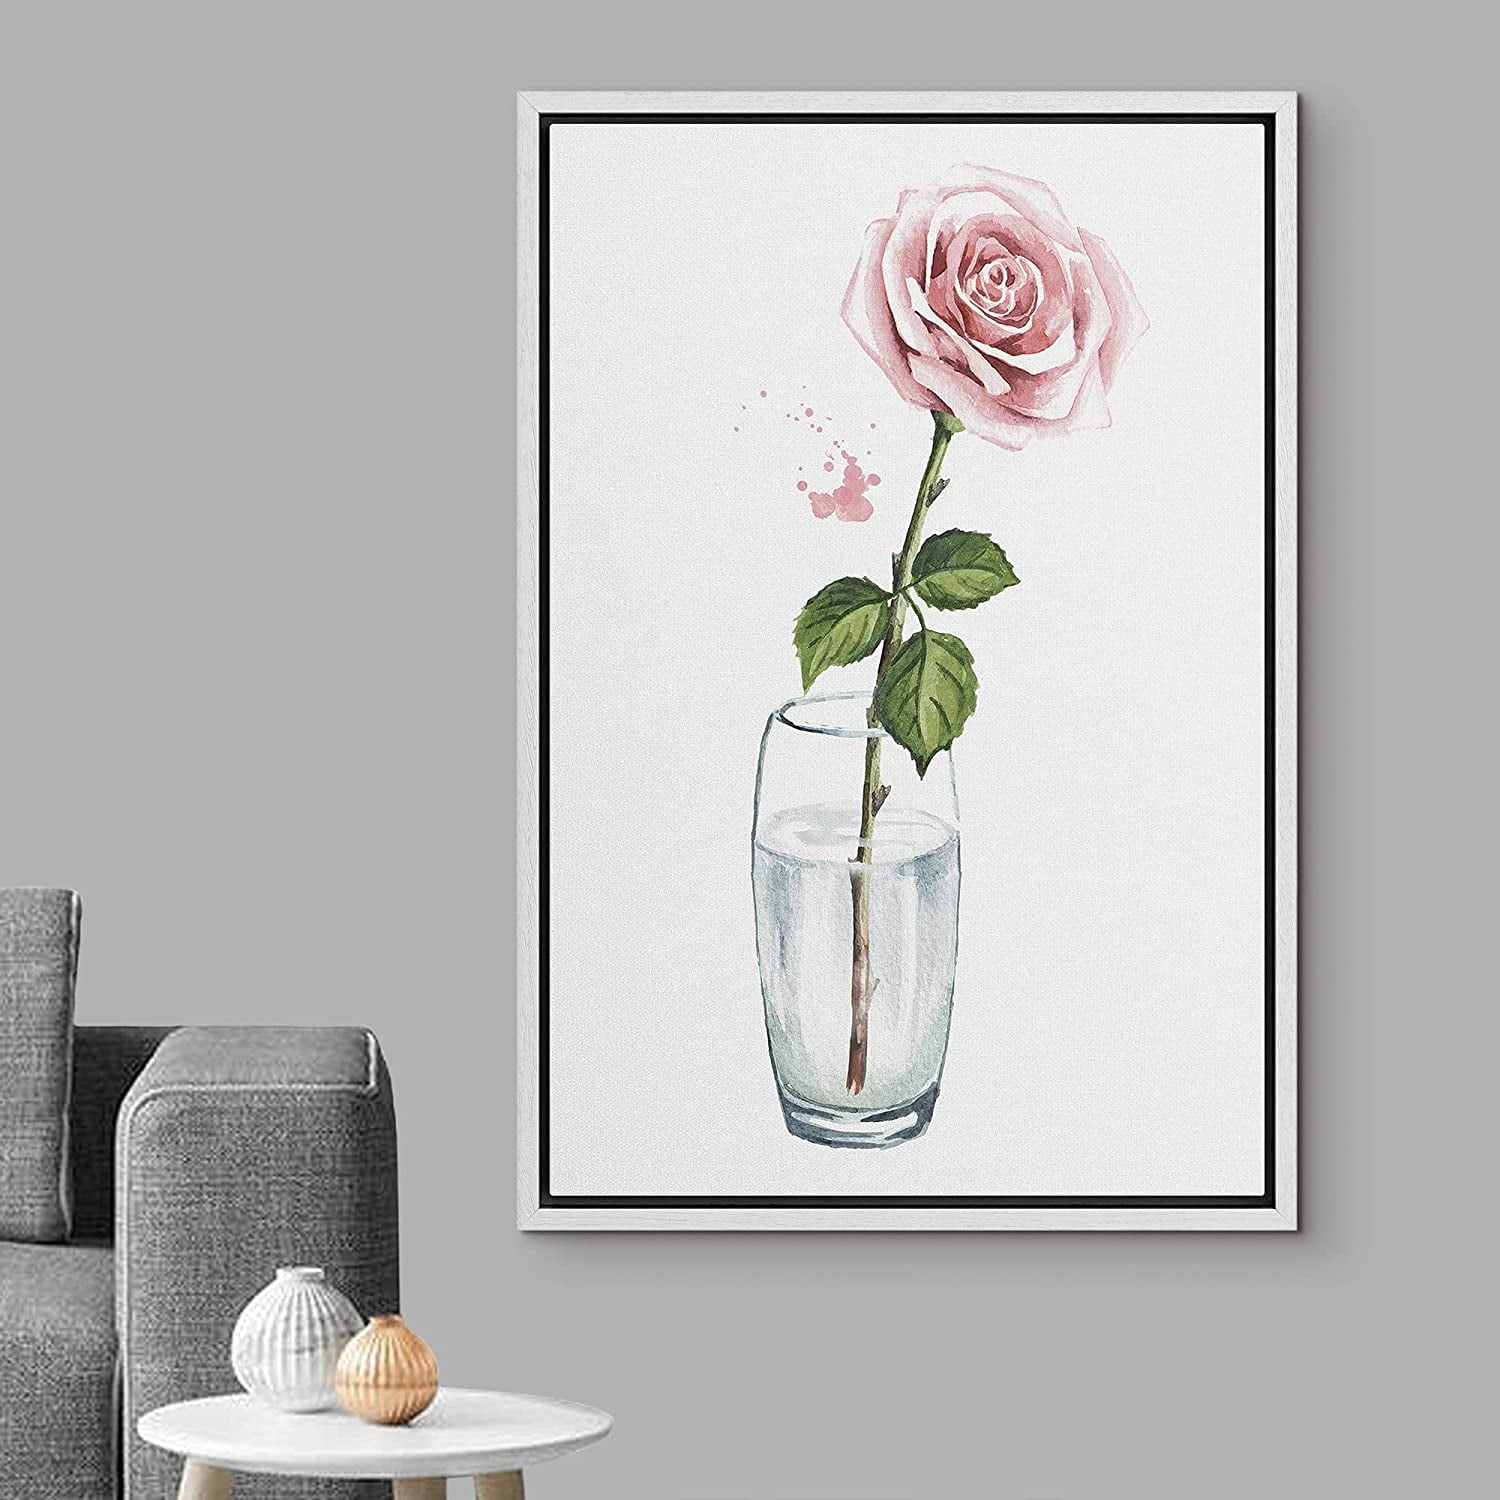 Wall26 Framed Canvas Print Wall Art Pink Rose in Glass Vase Floral Wilderness Illustrations Art Chic Relax/Calm Multicolor Pastel for Living Room, Bedroom, Office - 16"x24" - Walmart.com